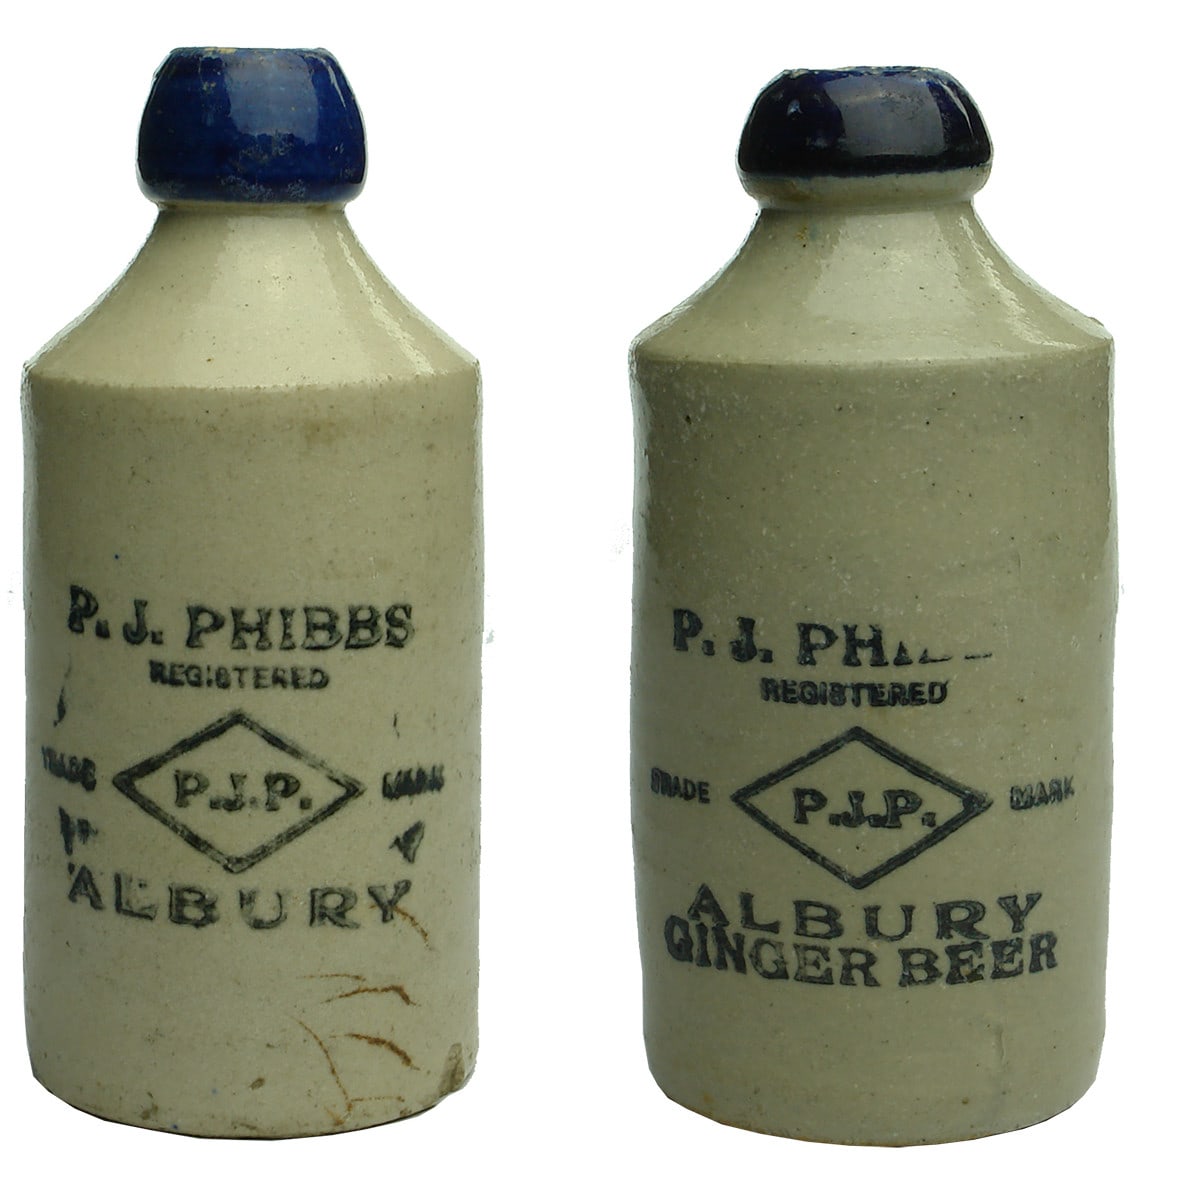 Pair of Ginger Beers. Different variations of P. J. Phibbs, Albury. Blue Lip. 10 oz. (New South Wales)